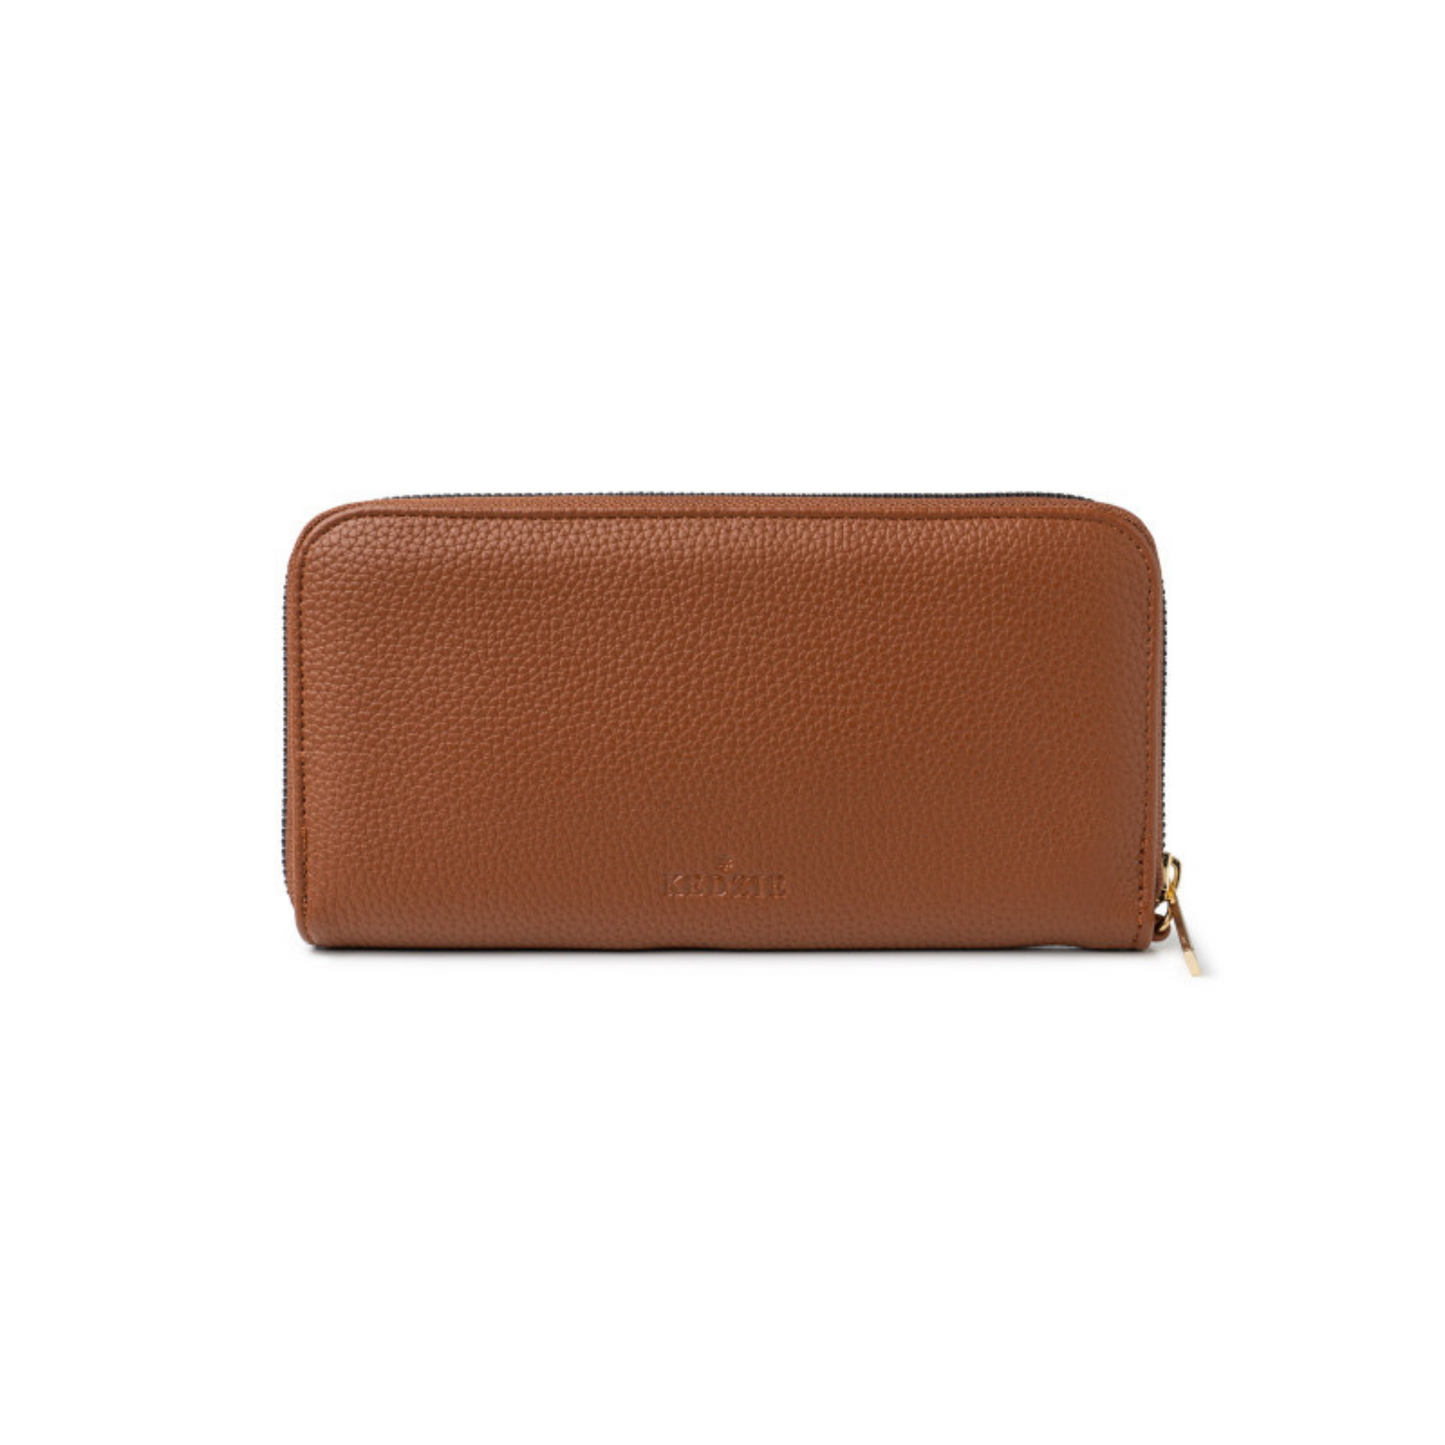 Eclipse crossbody clutch in warm brown color